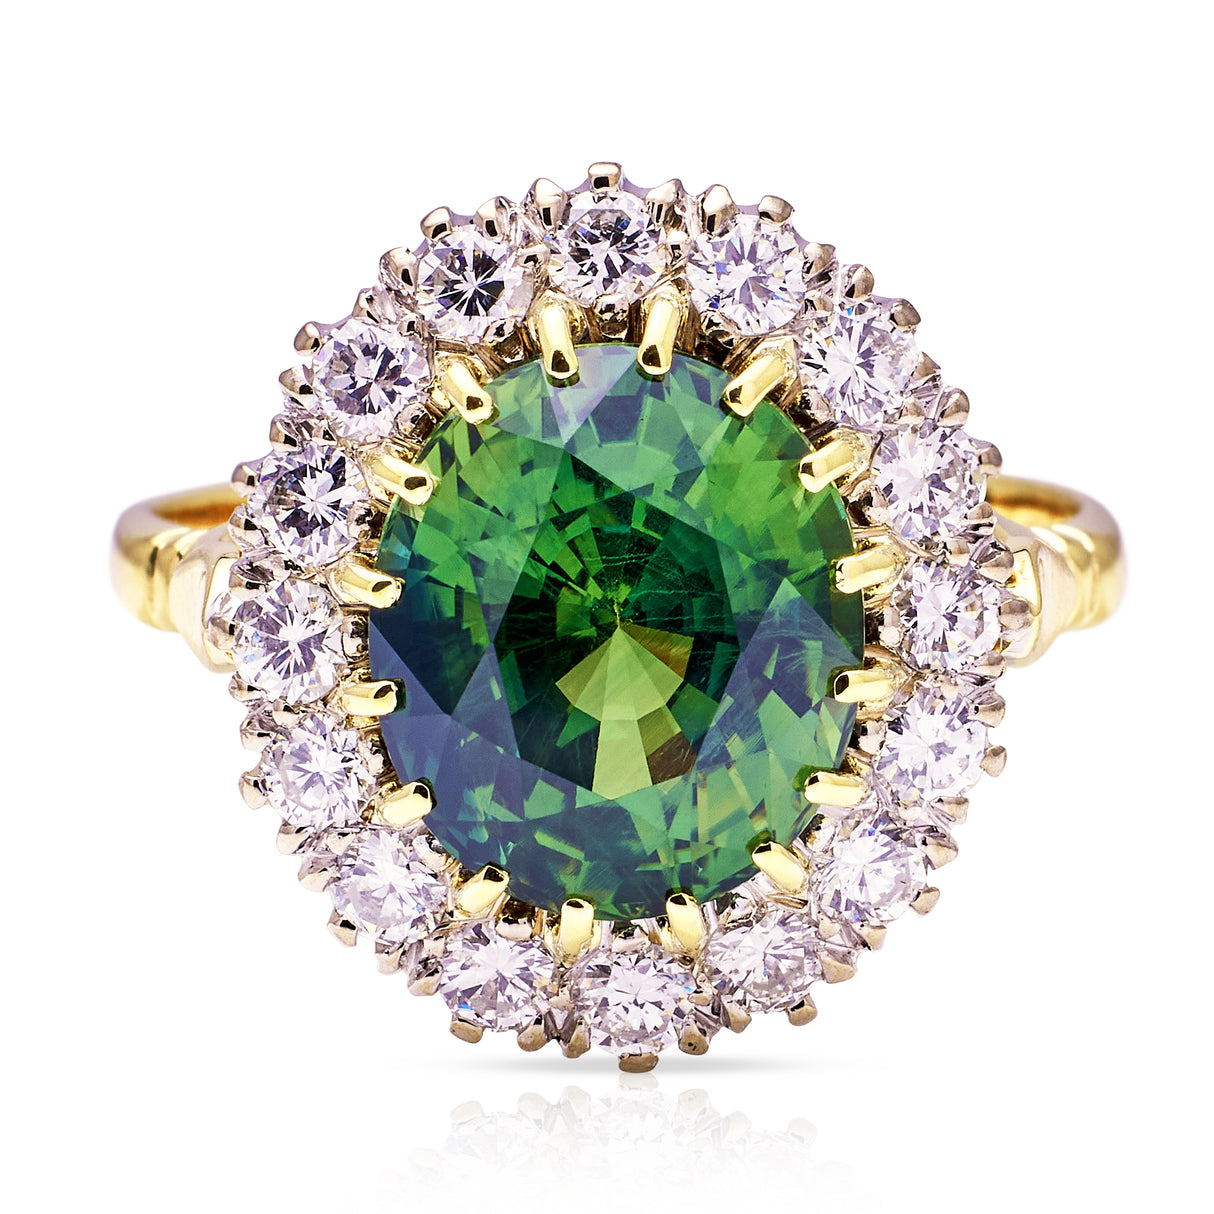 Vintage, 5ct Green Sapphire and Diamond Cluster Ring, 18ct Yellow Gold front view